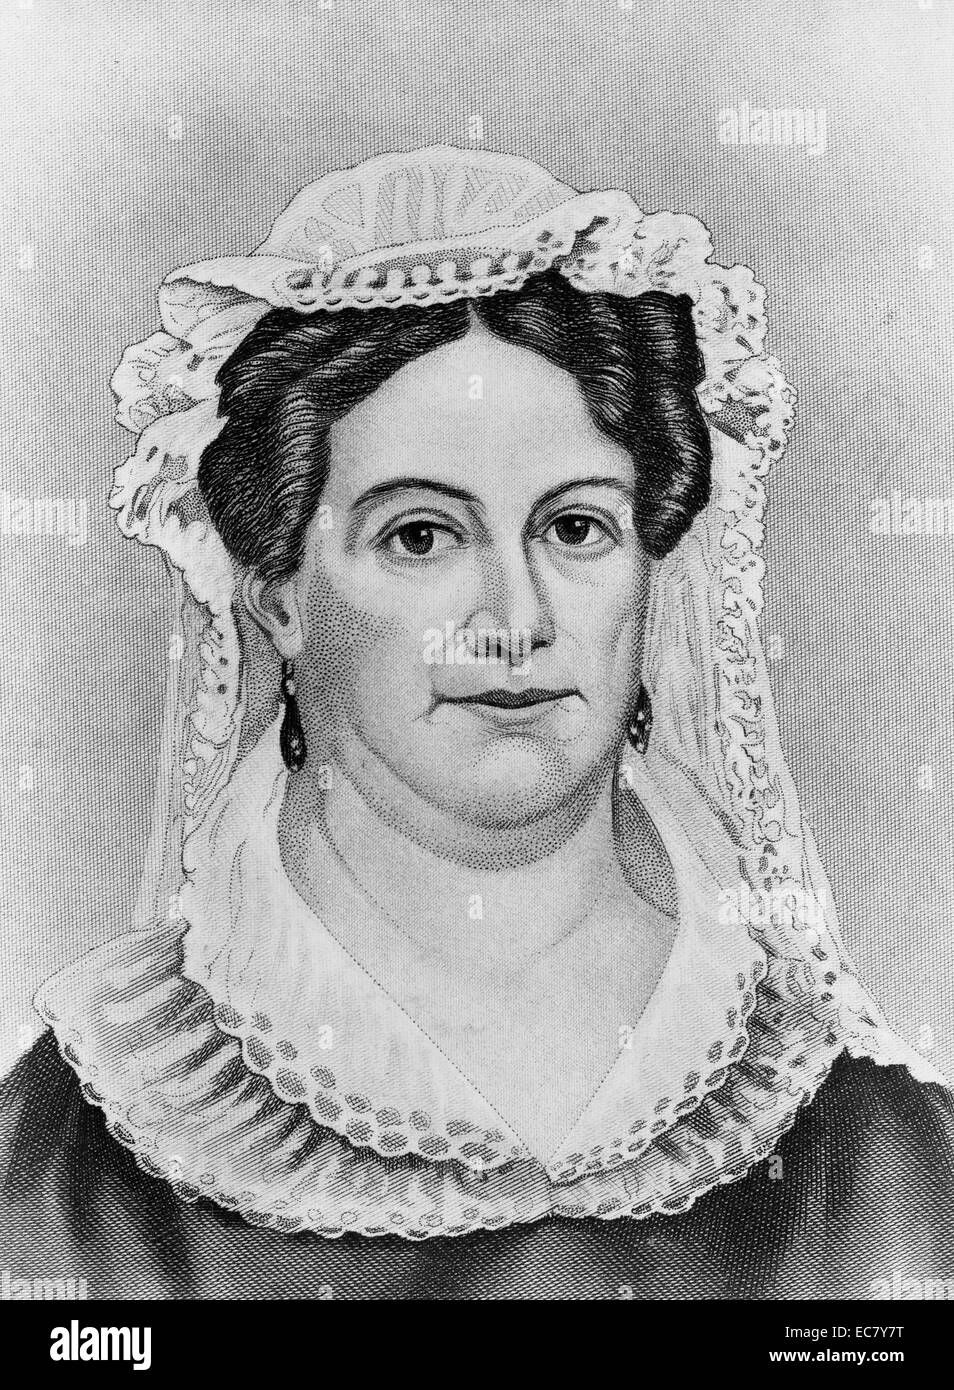 Mrs Andrew Jackson - Rachel Donelson Jackson (1767-1828). She was the wife of US President Andrew Jackson, although she was never a First Lady as she died before his inauguration. Stock Photo